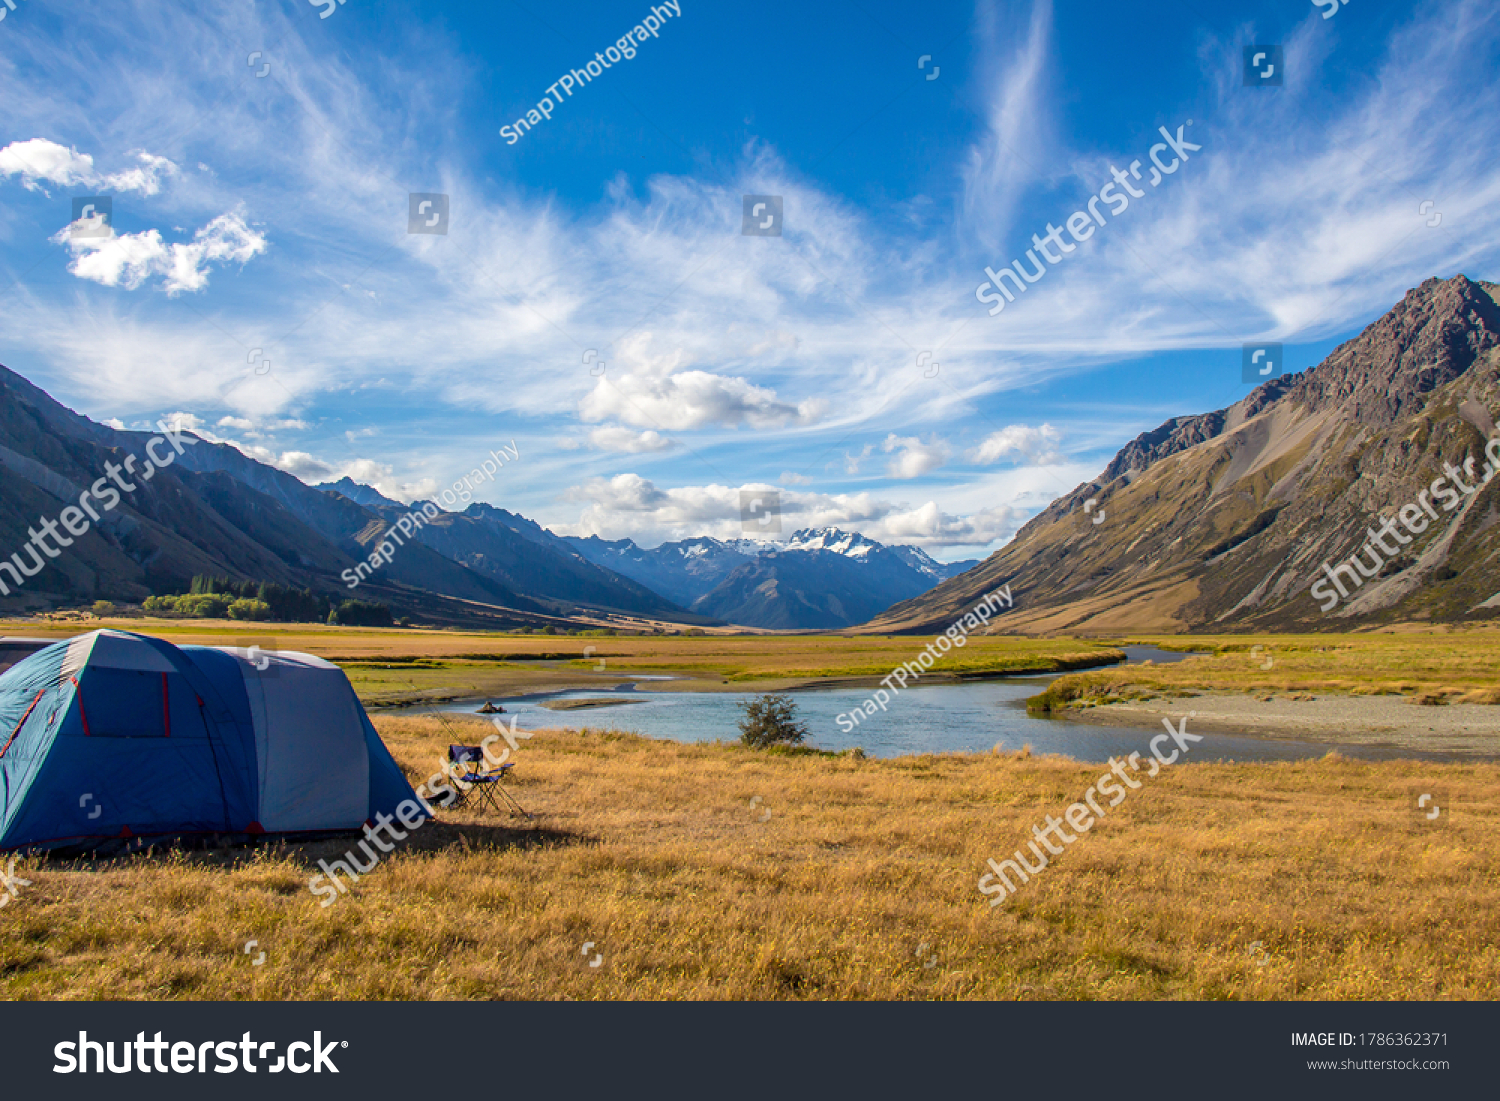 A tent pitched beside the Ahuriri River, surrounded by mountains, in Cantebury, South Island, New Zealand #1786362371